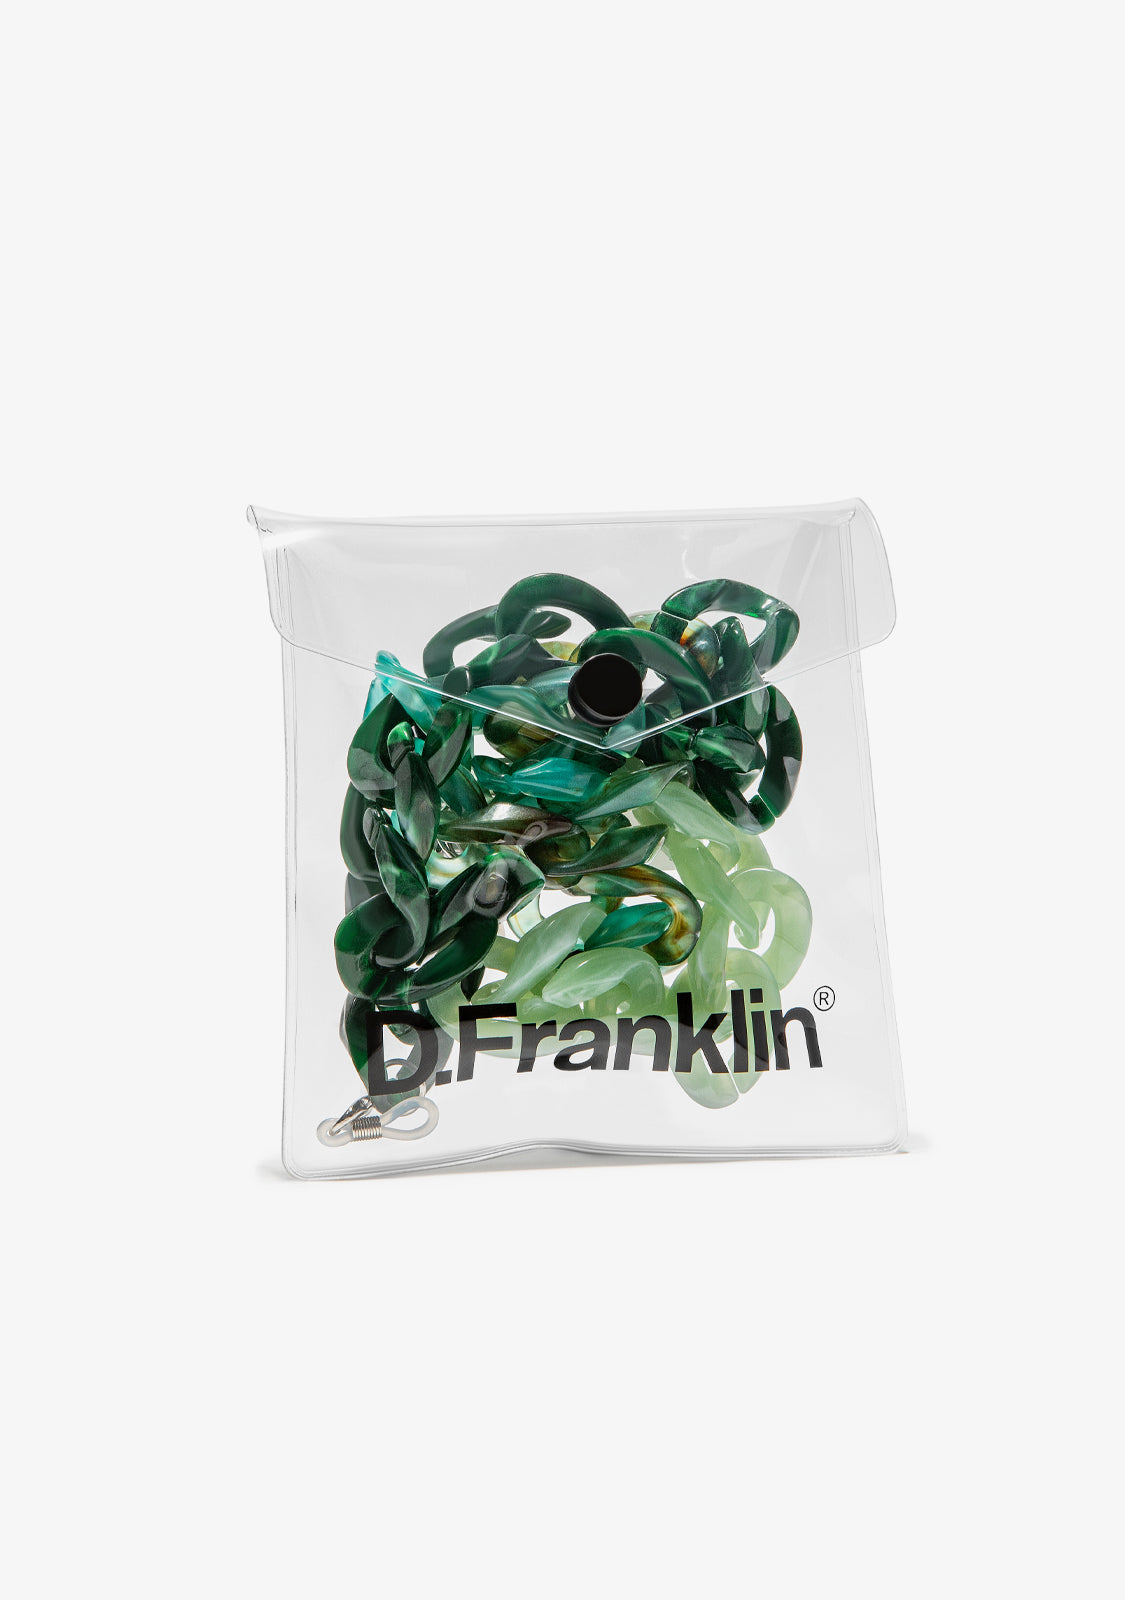 Link Chain Green